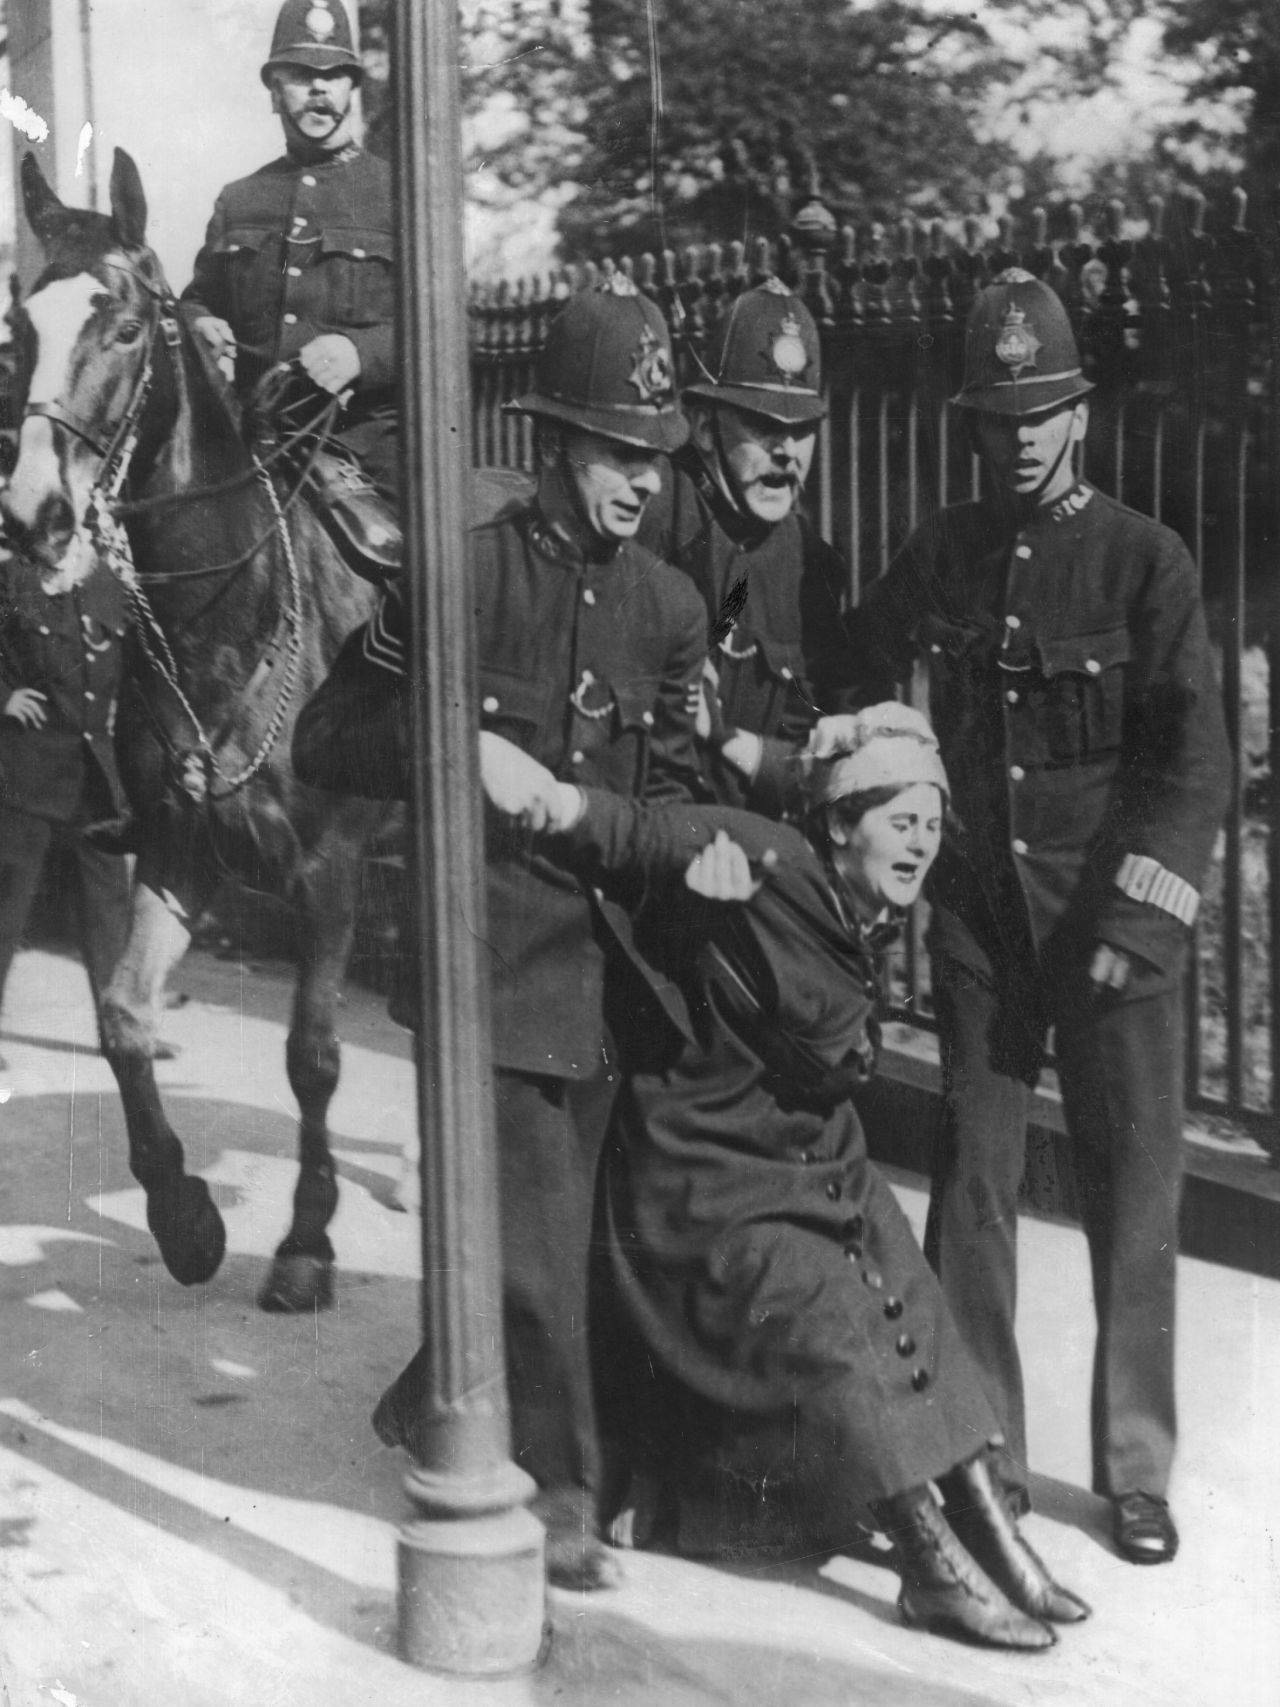 The activists used militant protest methods, such as chaining themselves to railings and smashing windows. Historians are divided on their success, with Tanner arguing: "Unfortunately for the legacy of Emily Davison, World War One broke out a year later, in 1914, and the Suffragettes believed it would have appeared unpatriotic to continue the struggle while the country was at war."